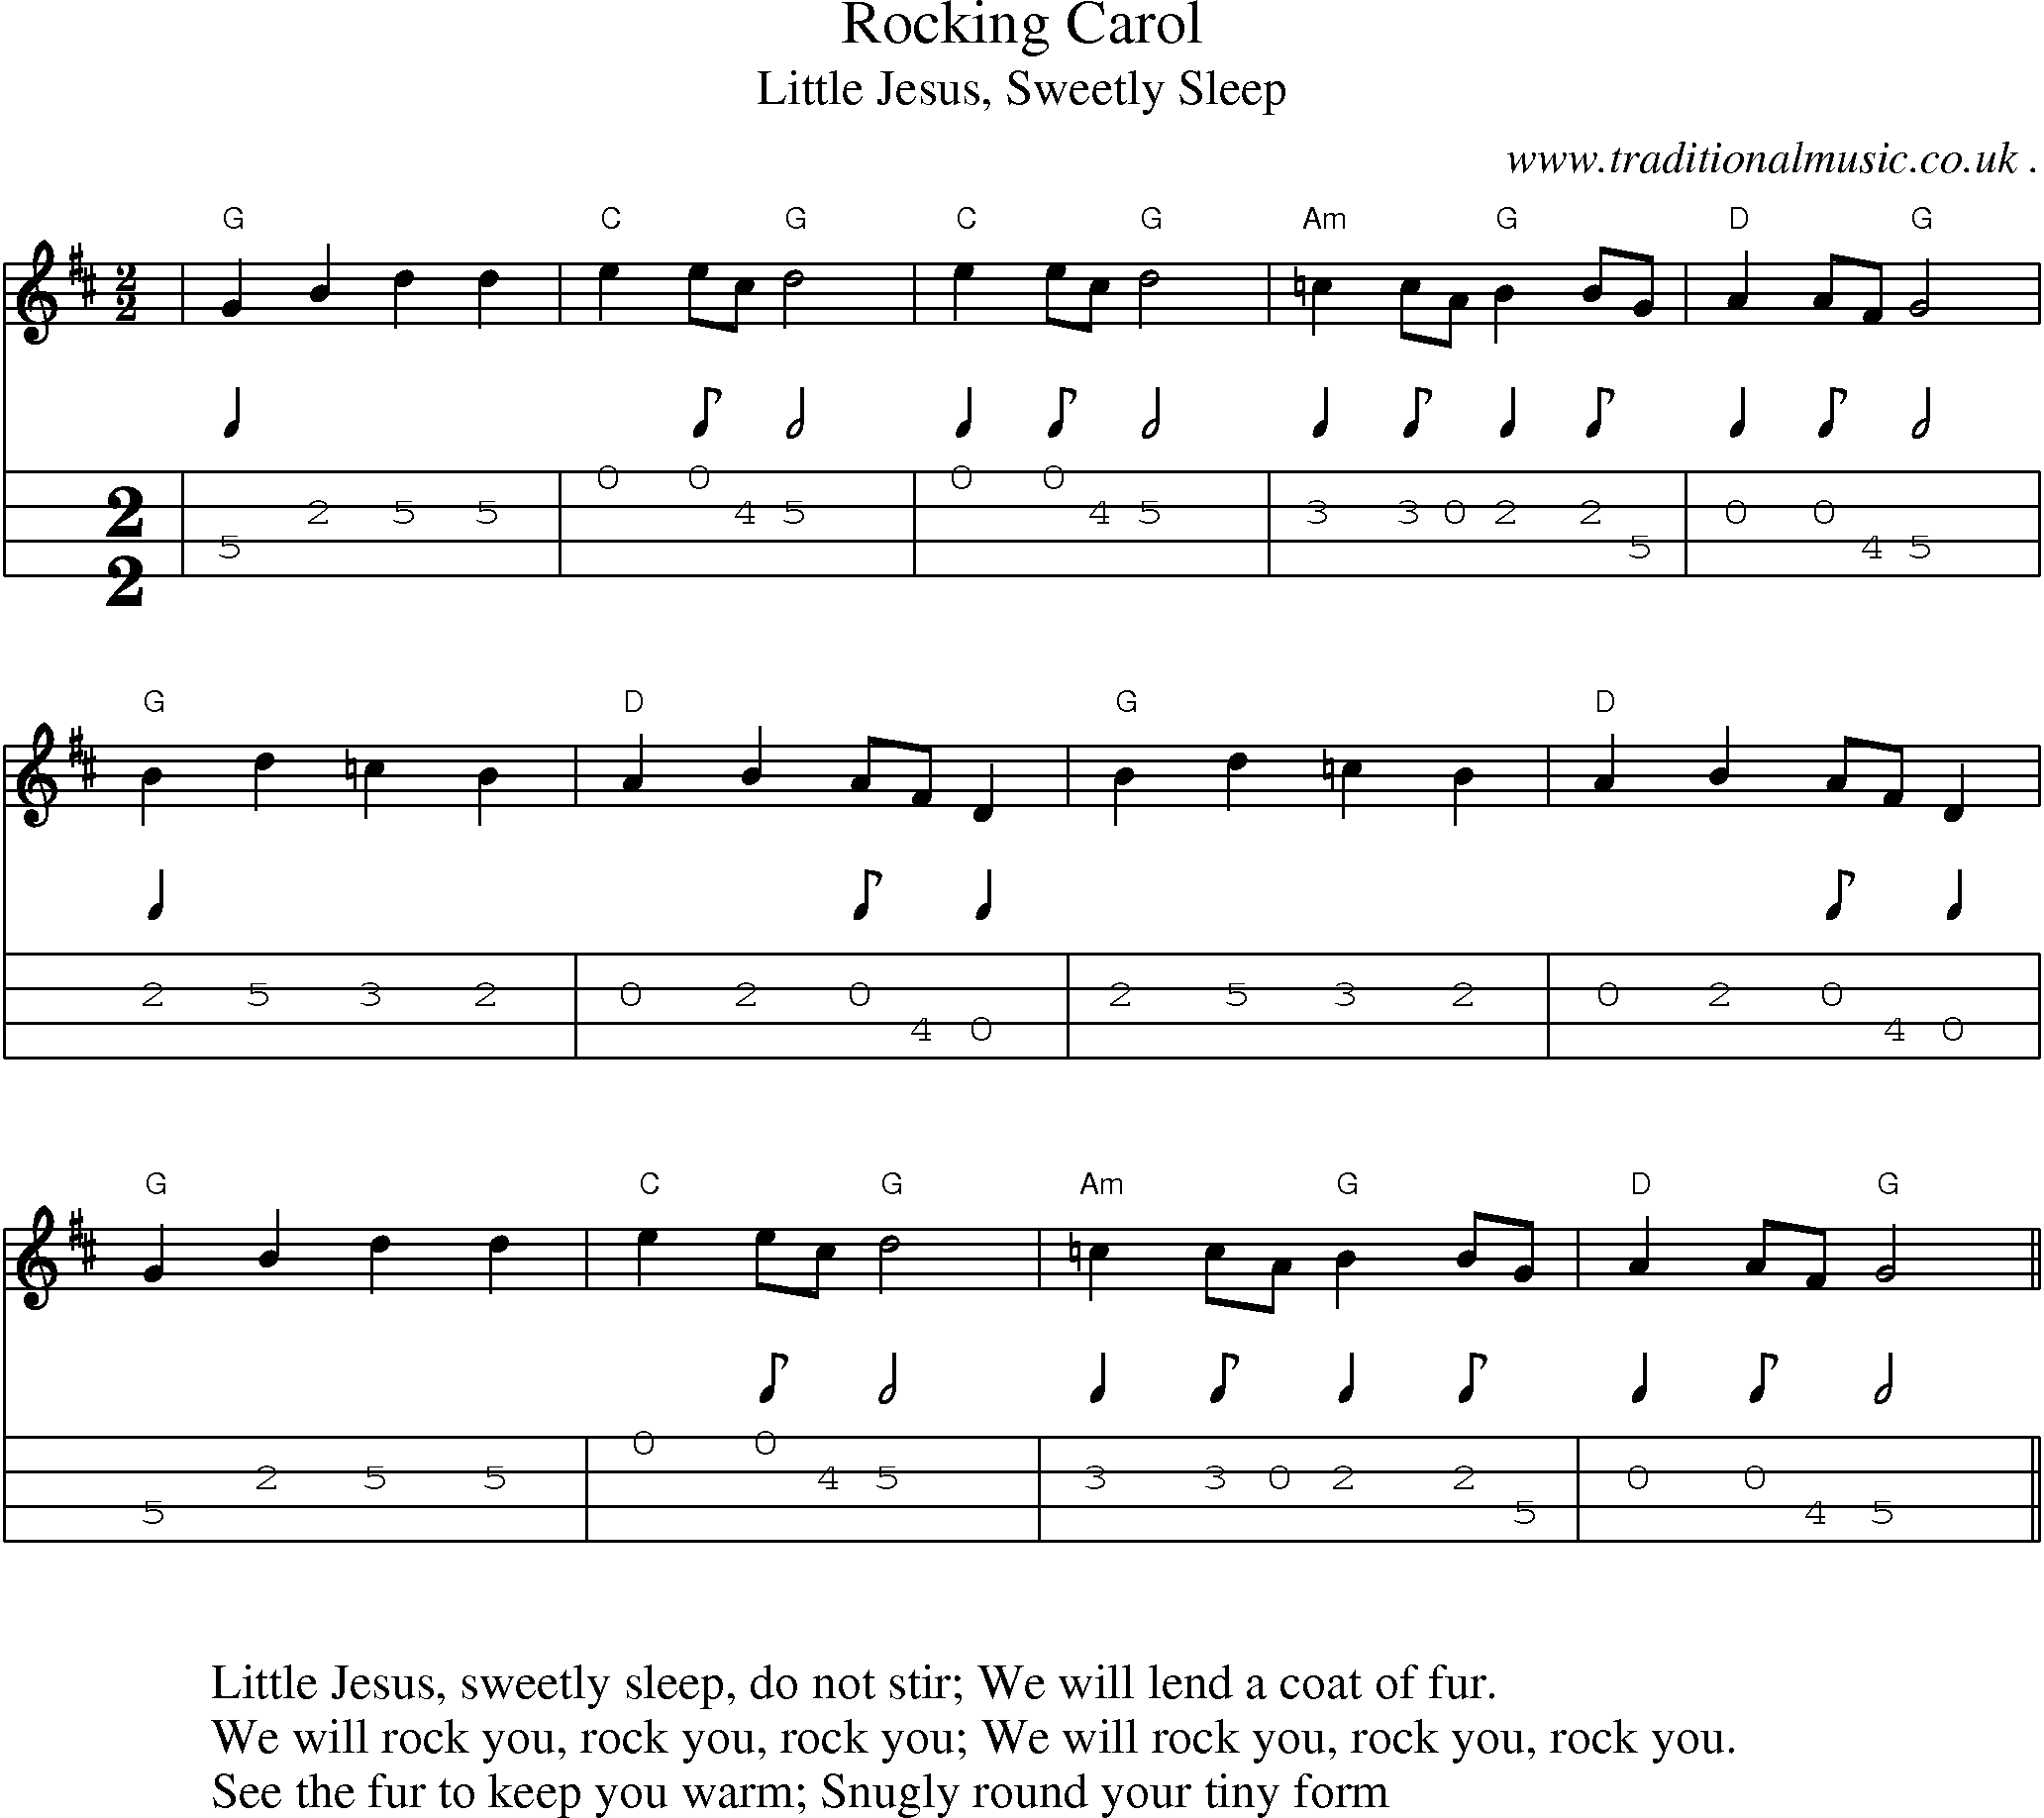 Music Score and Guitar Tabs for Rocking Carol